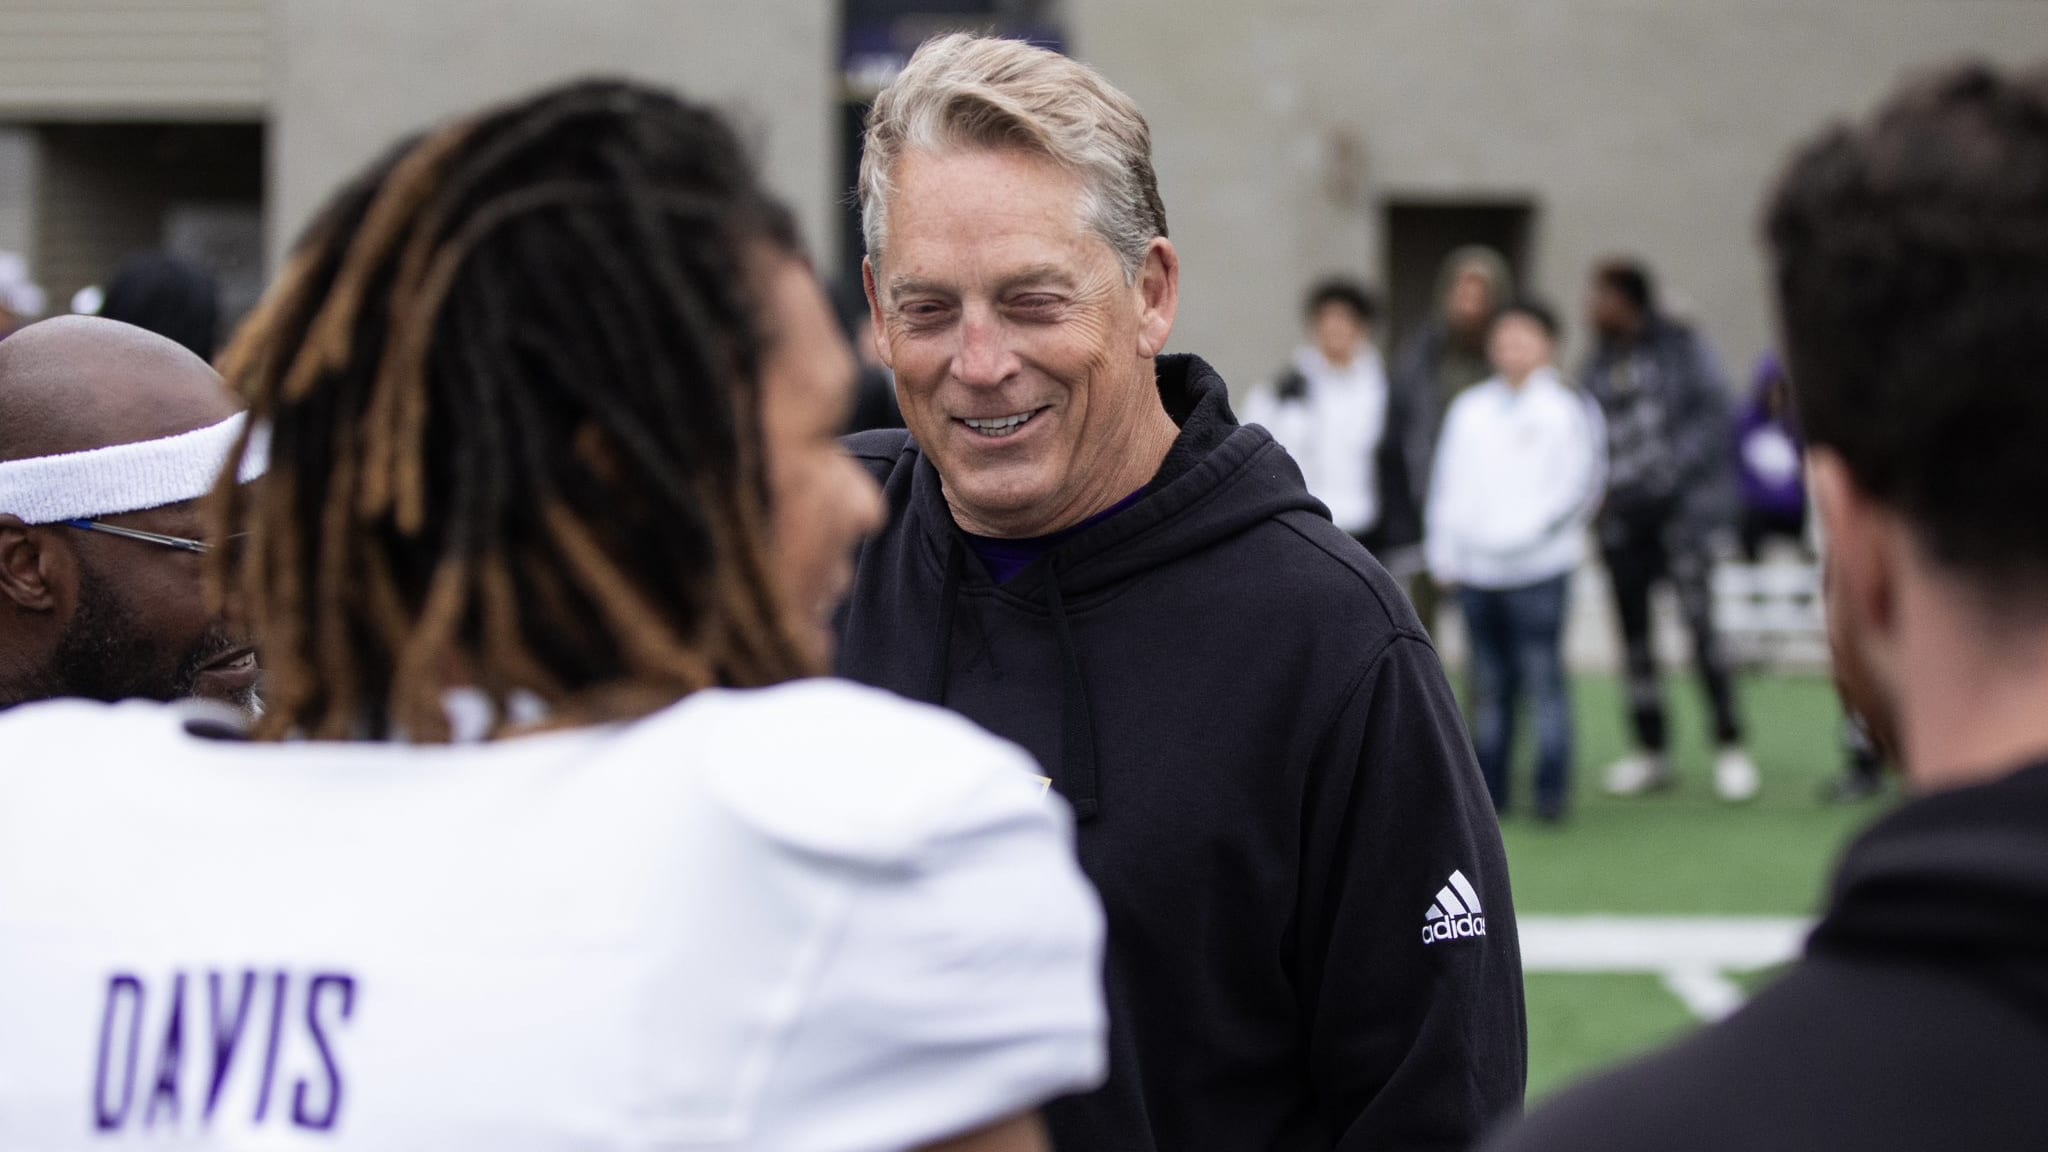 Among VIPs, Husky Practice Is Where One Goes to Be Seen